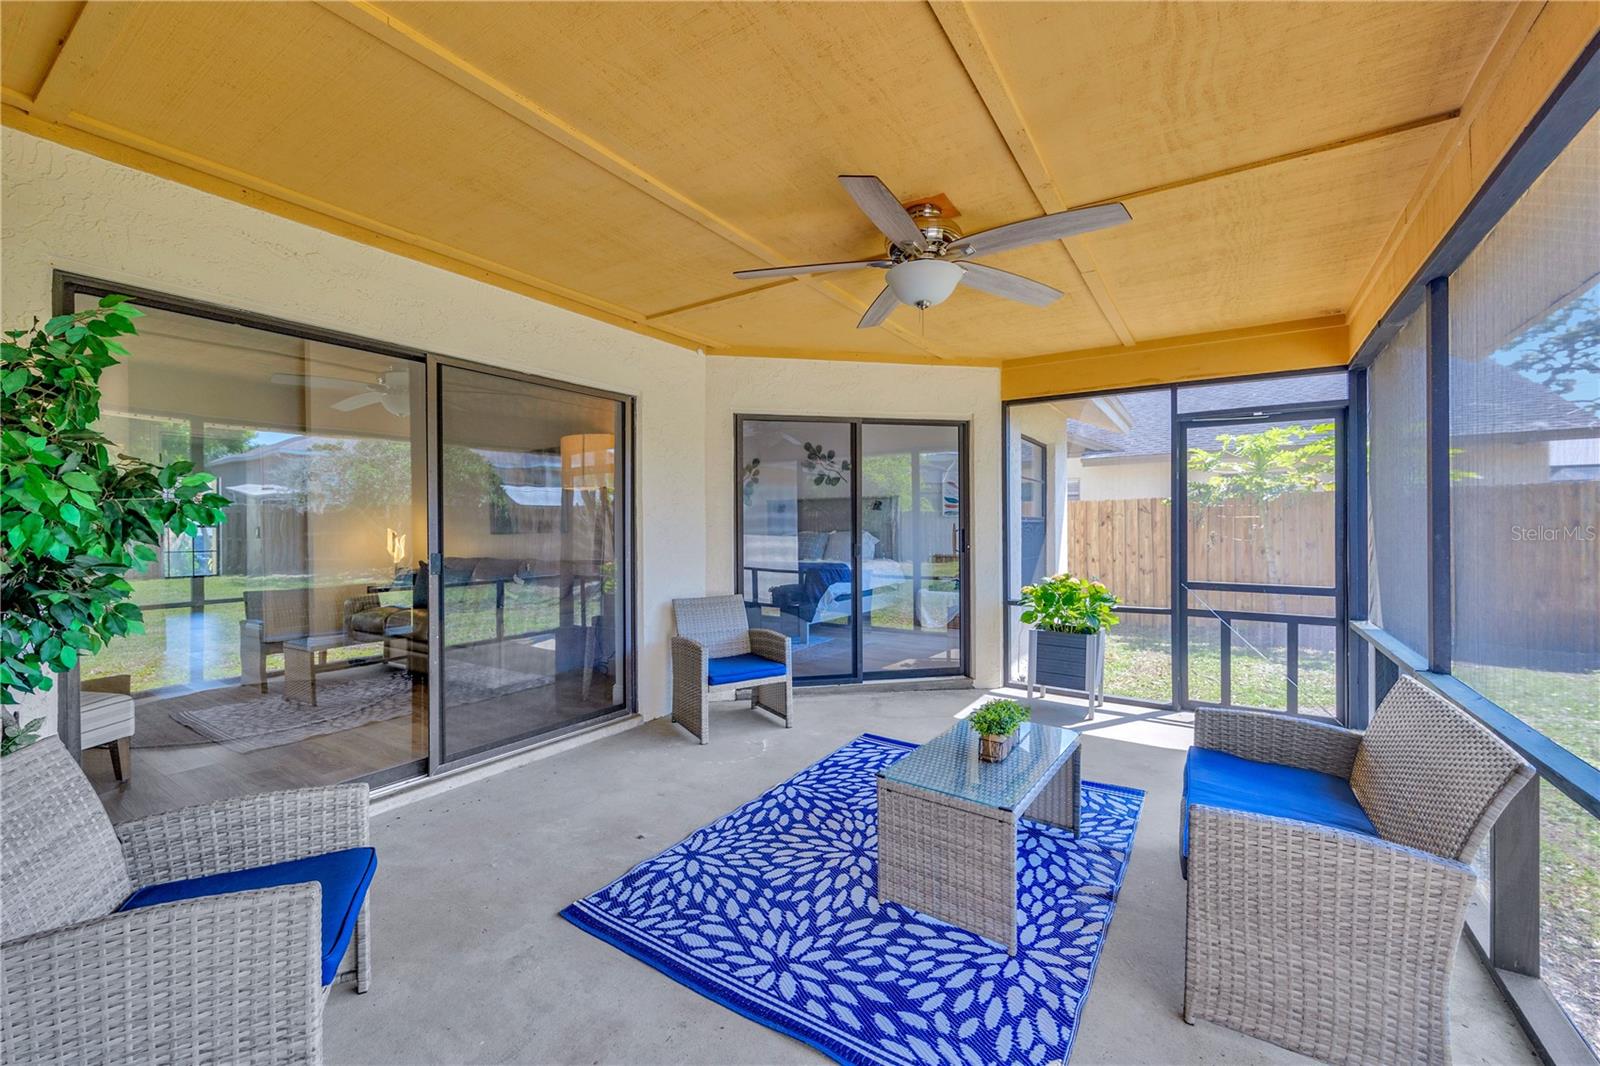 Spacious screened lanai with access from 3 different rooms